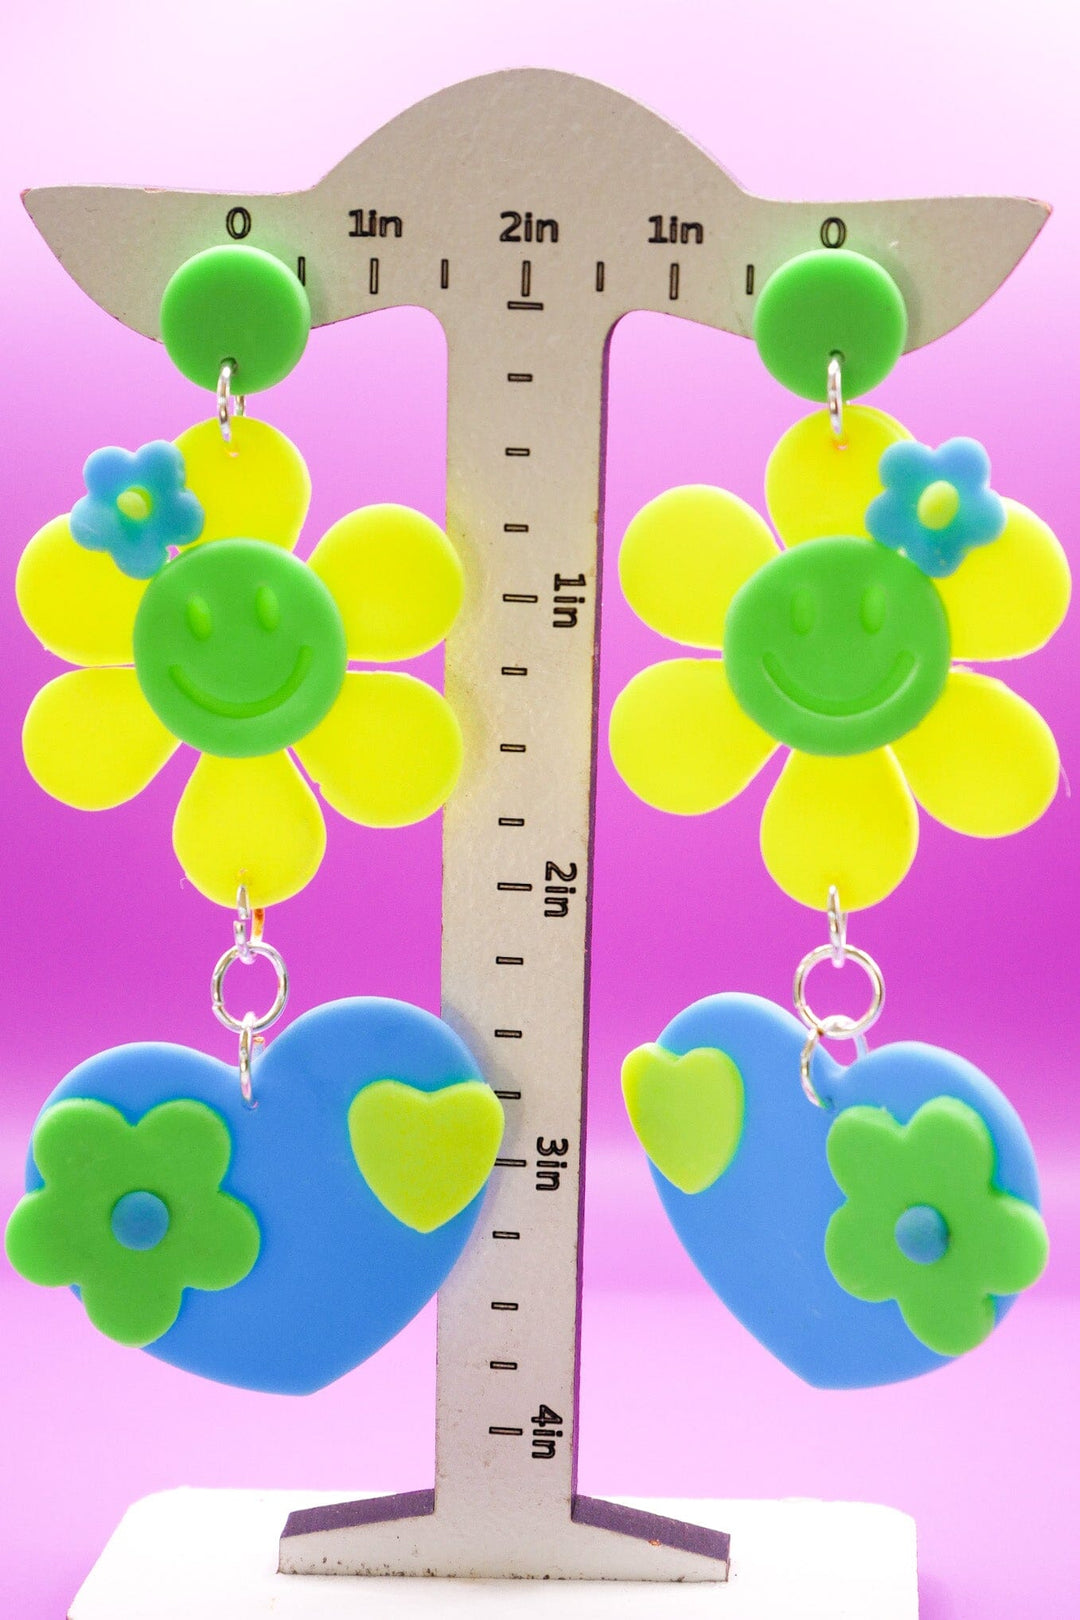 Hearts in Bloom Baby Blue + Neon Yellow Earrings Love Hand and Heart 